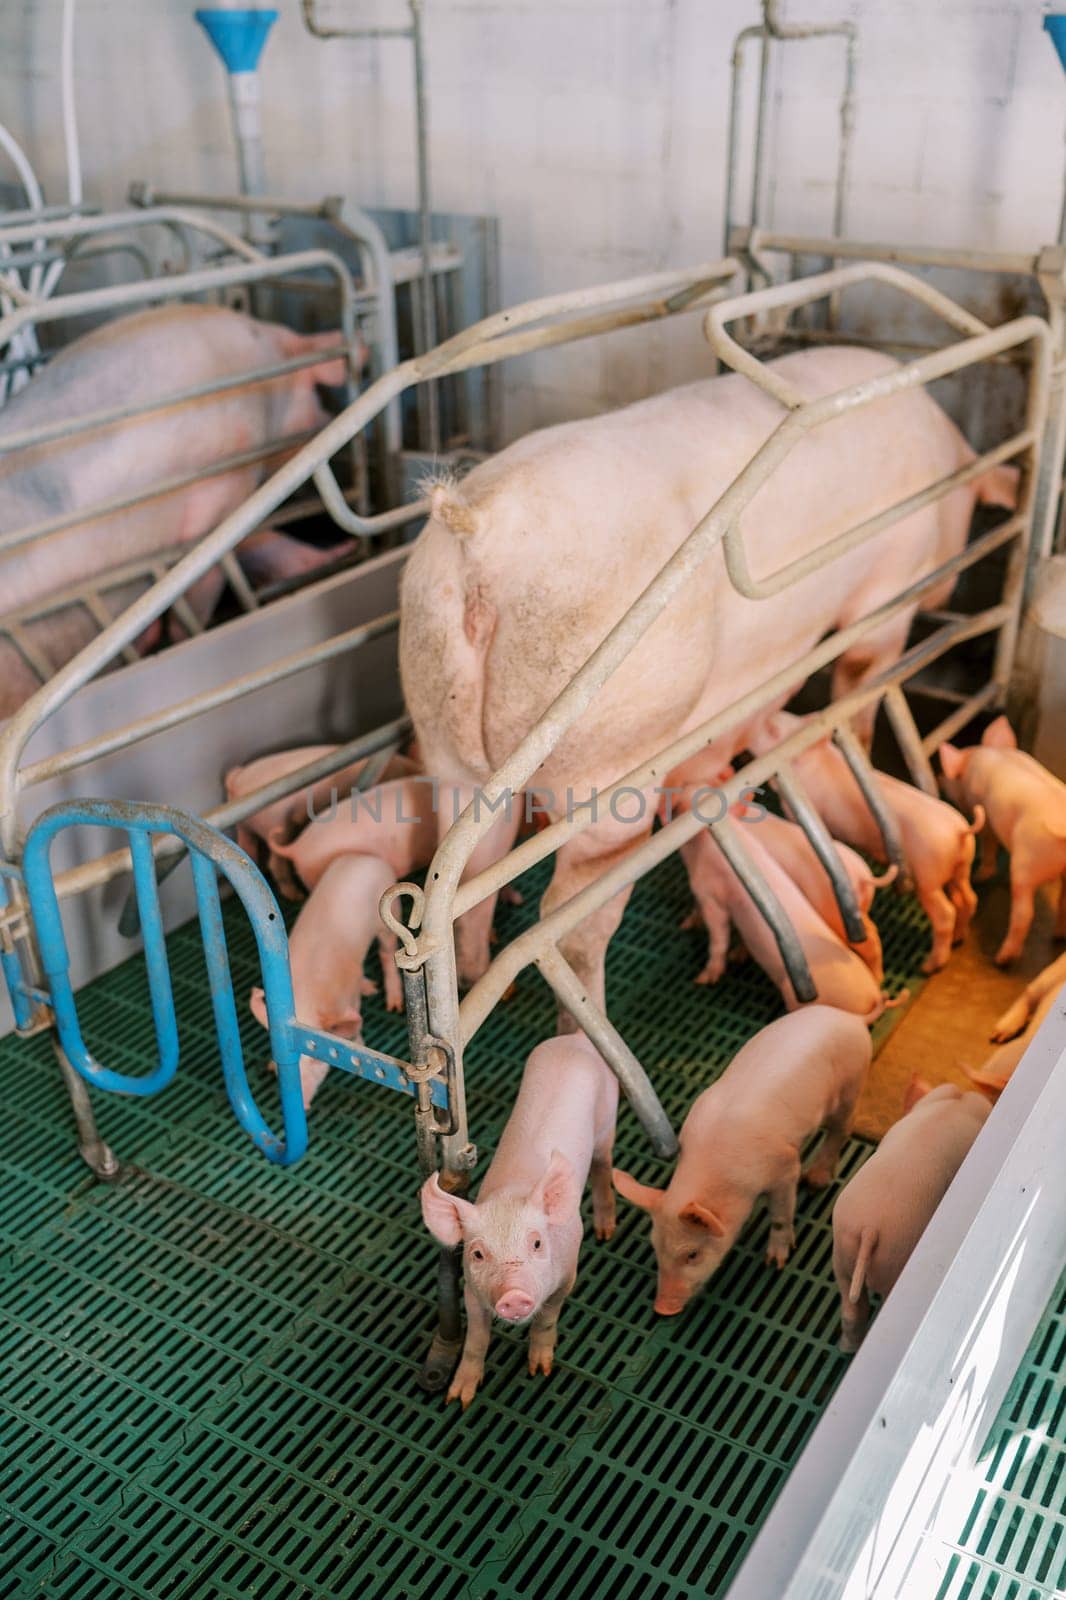 Large sow stands in a pen on a farm next to small piglets. Back view. High quality photo